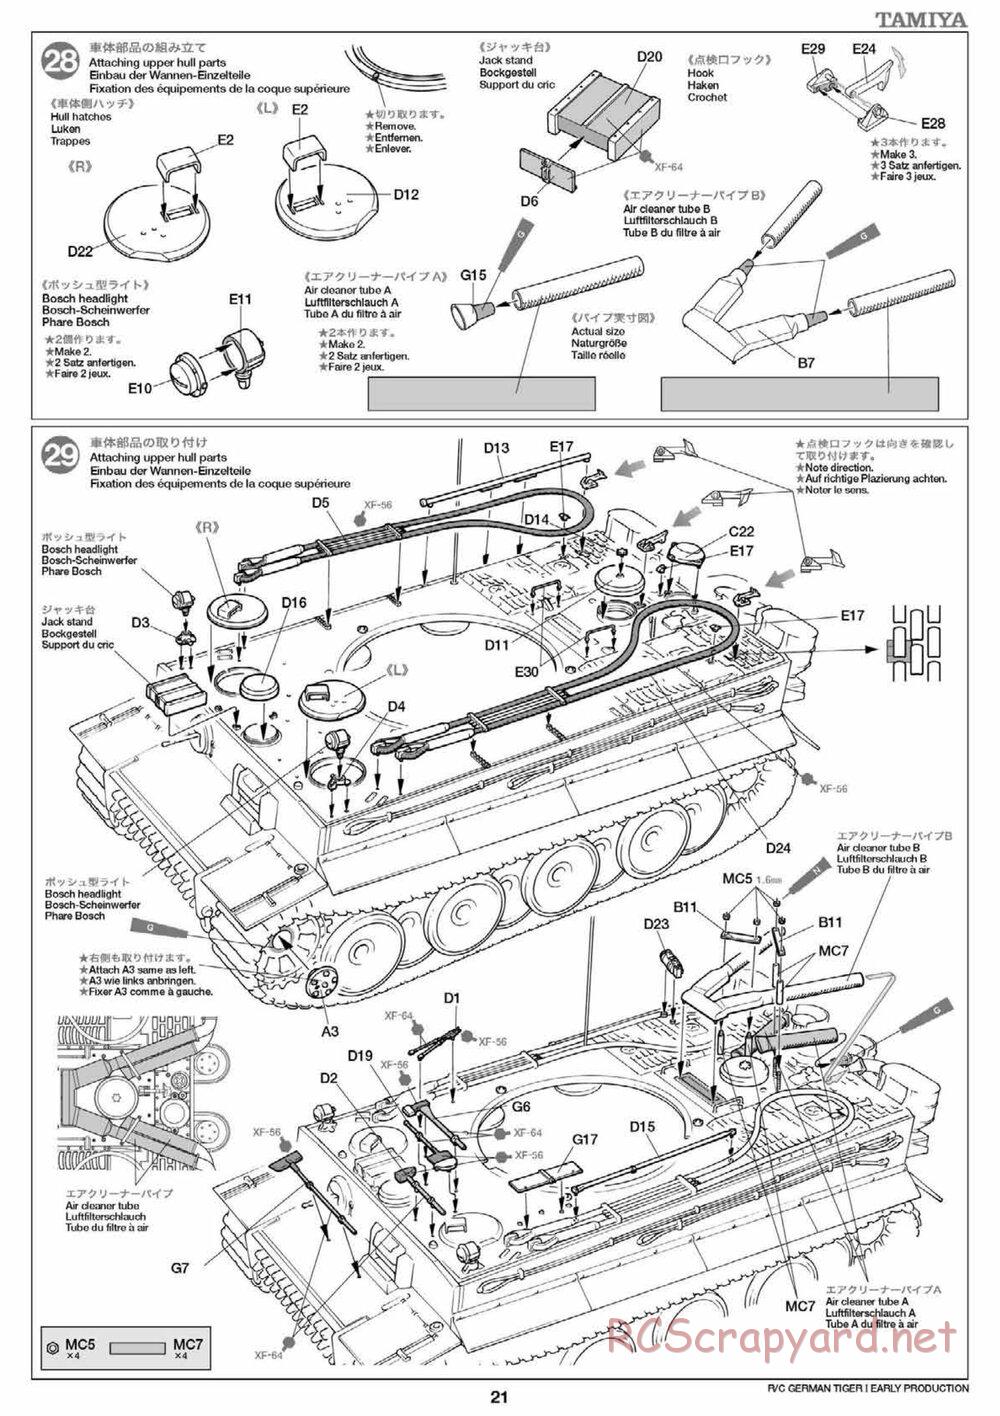 Tamiya - Tiger I Early Production - 1/16 Scale Chassis - Manual - Page 21